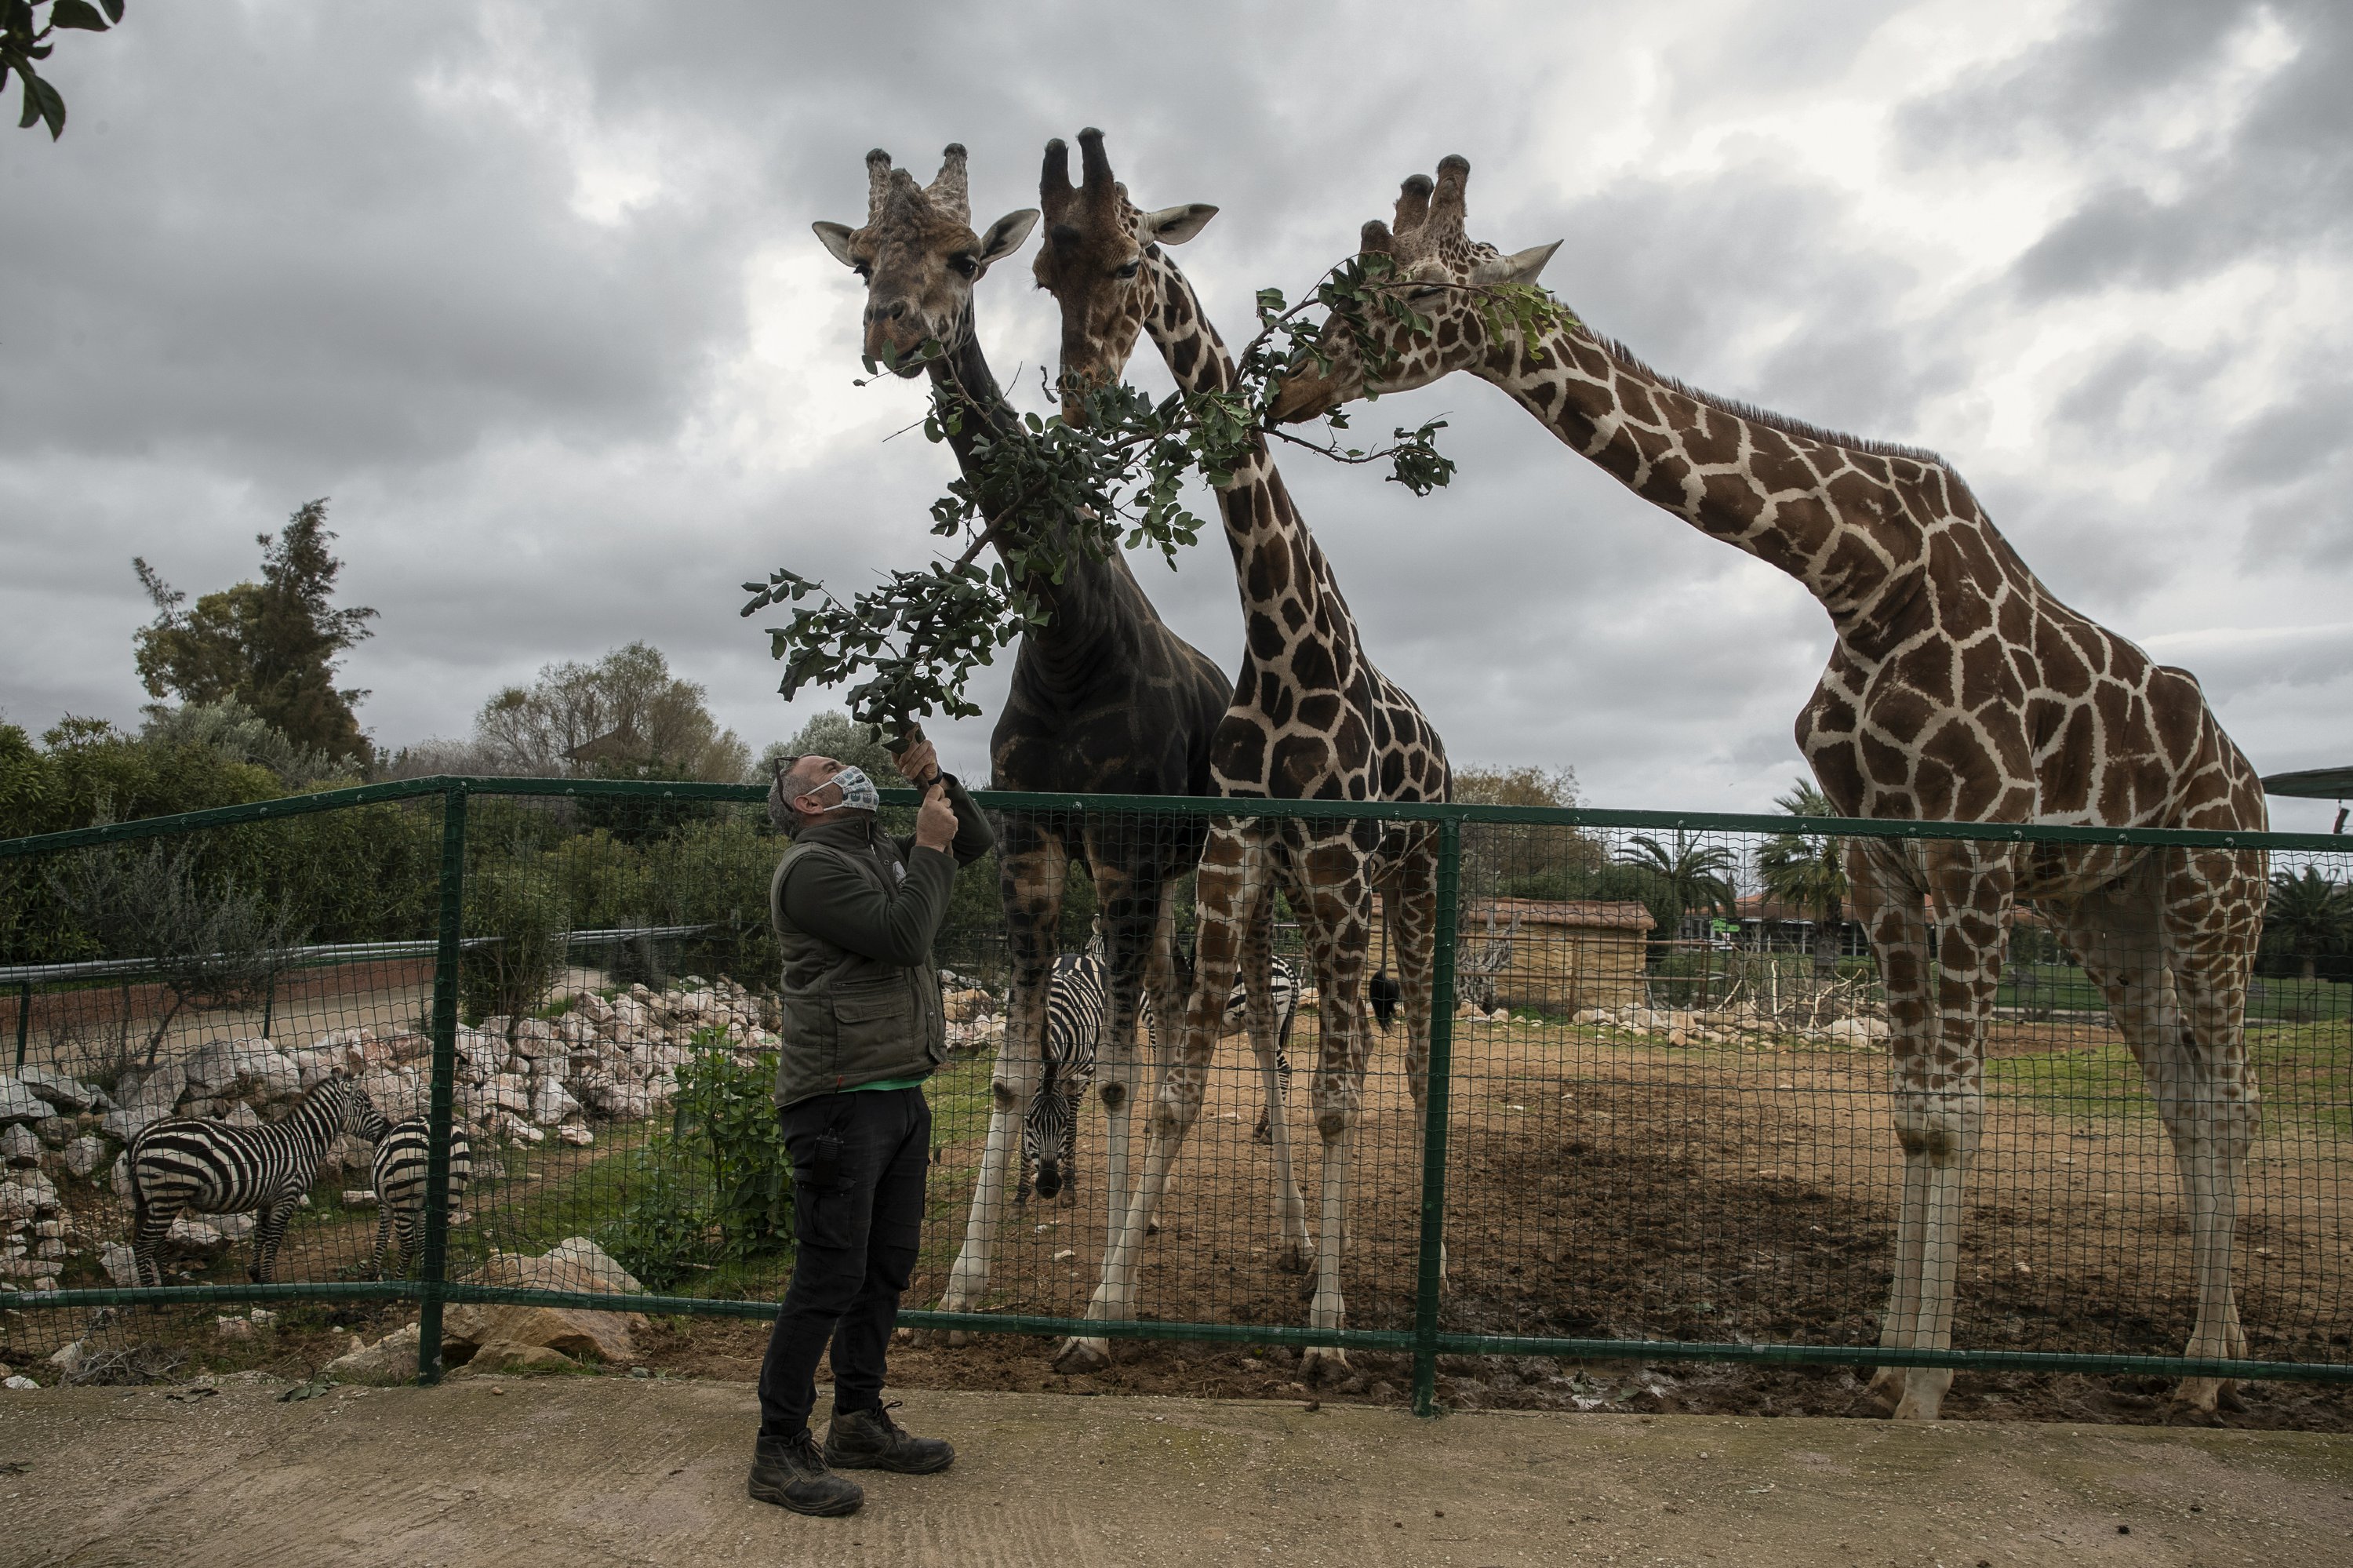 Without income, 2,000 mouths to feed: blockade destroys Greek zoo